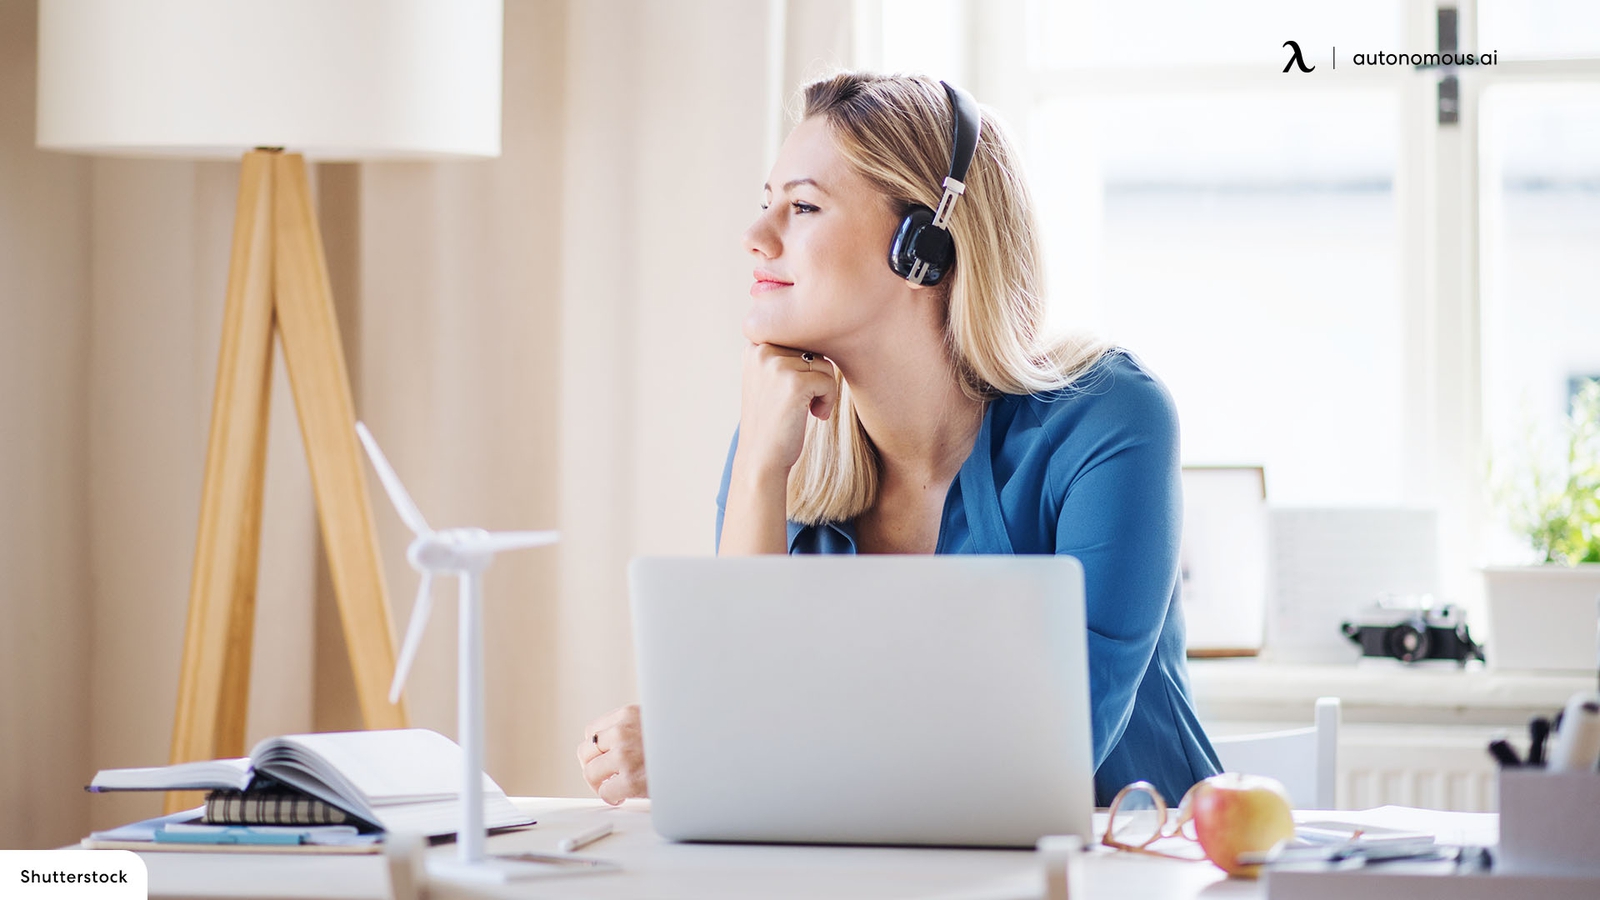 Work from Home Vs Office: Which One is Better?